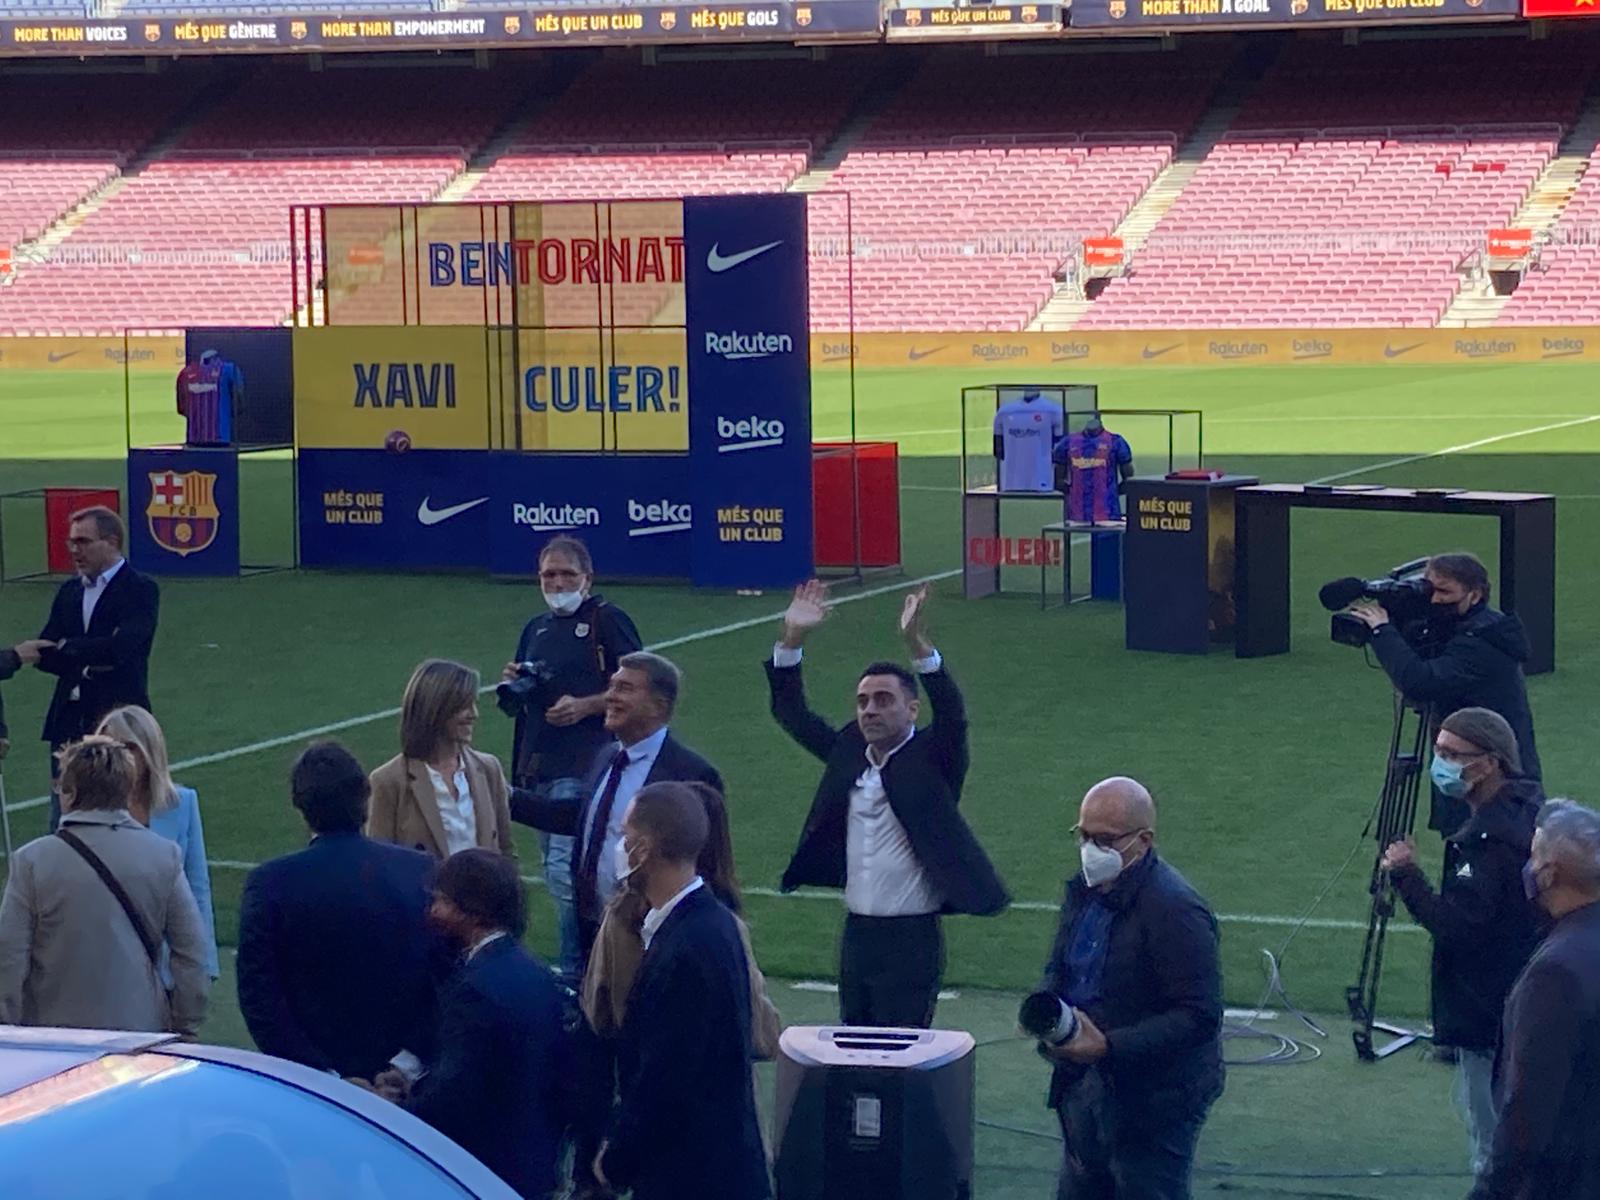 Xavi Hernádez waves to fans in the Camp Nou after being presented as the new manager of FC Barcelona (by Cillian Shields)